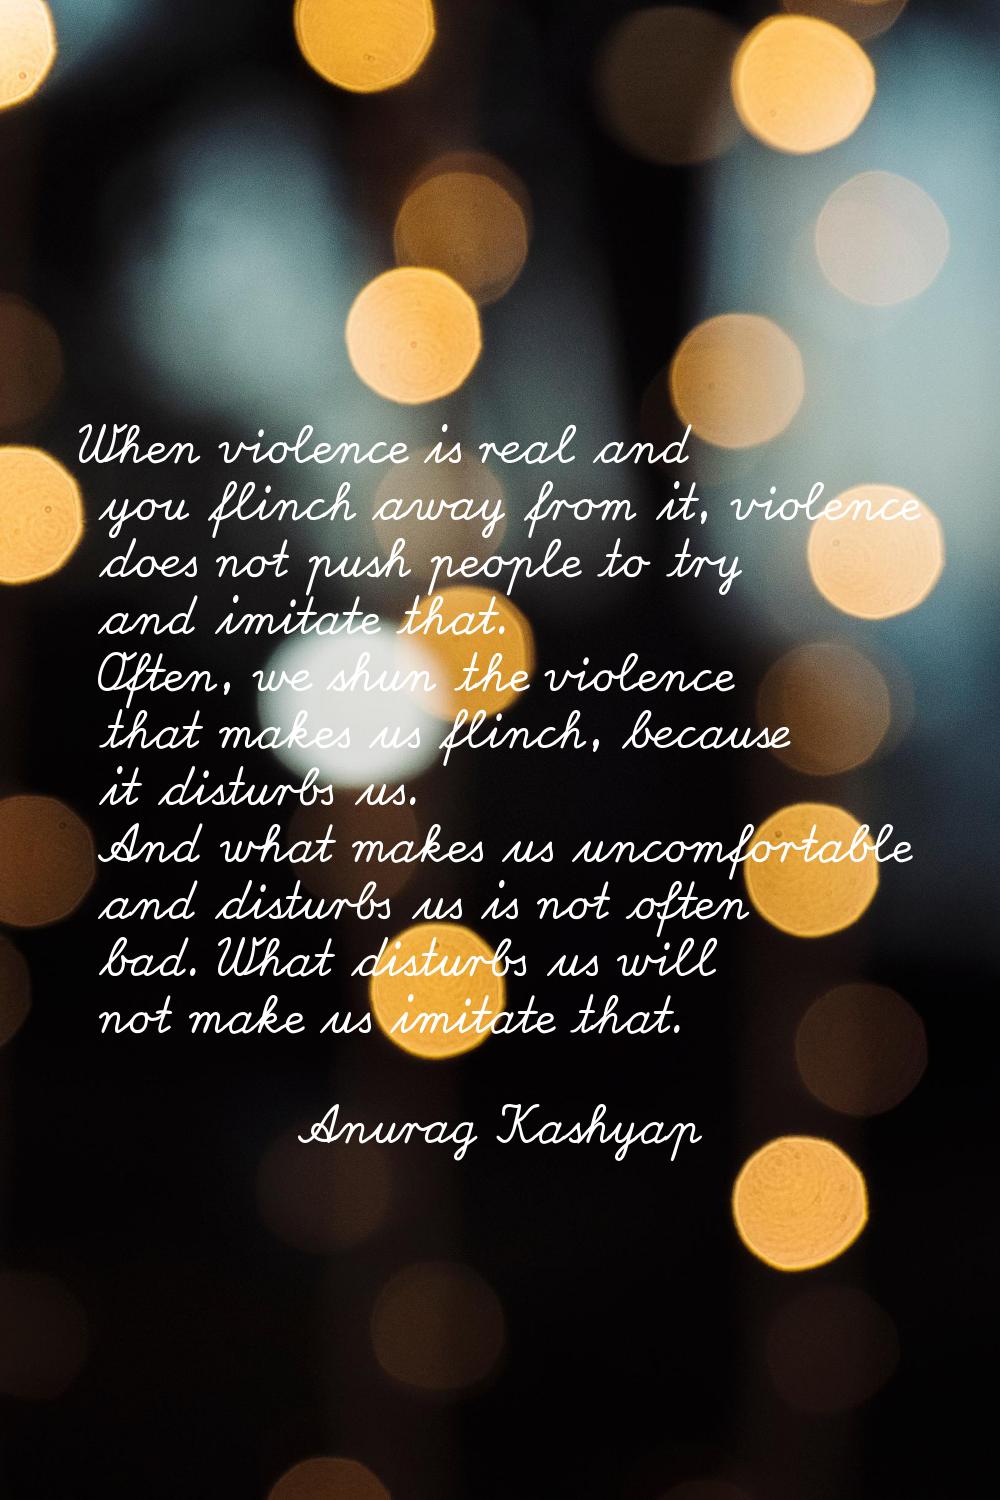 When violence is real and you flinch away from it, violence does not push people to try and imitate